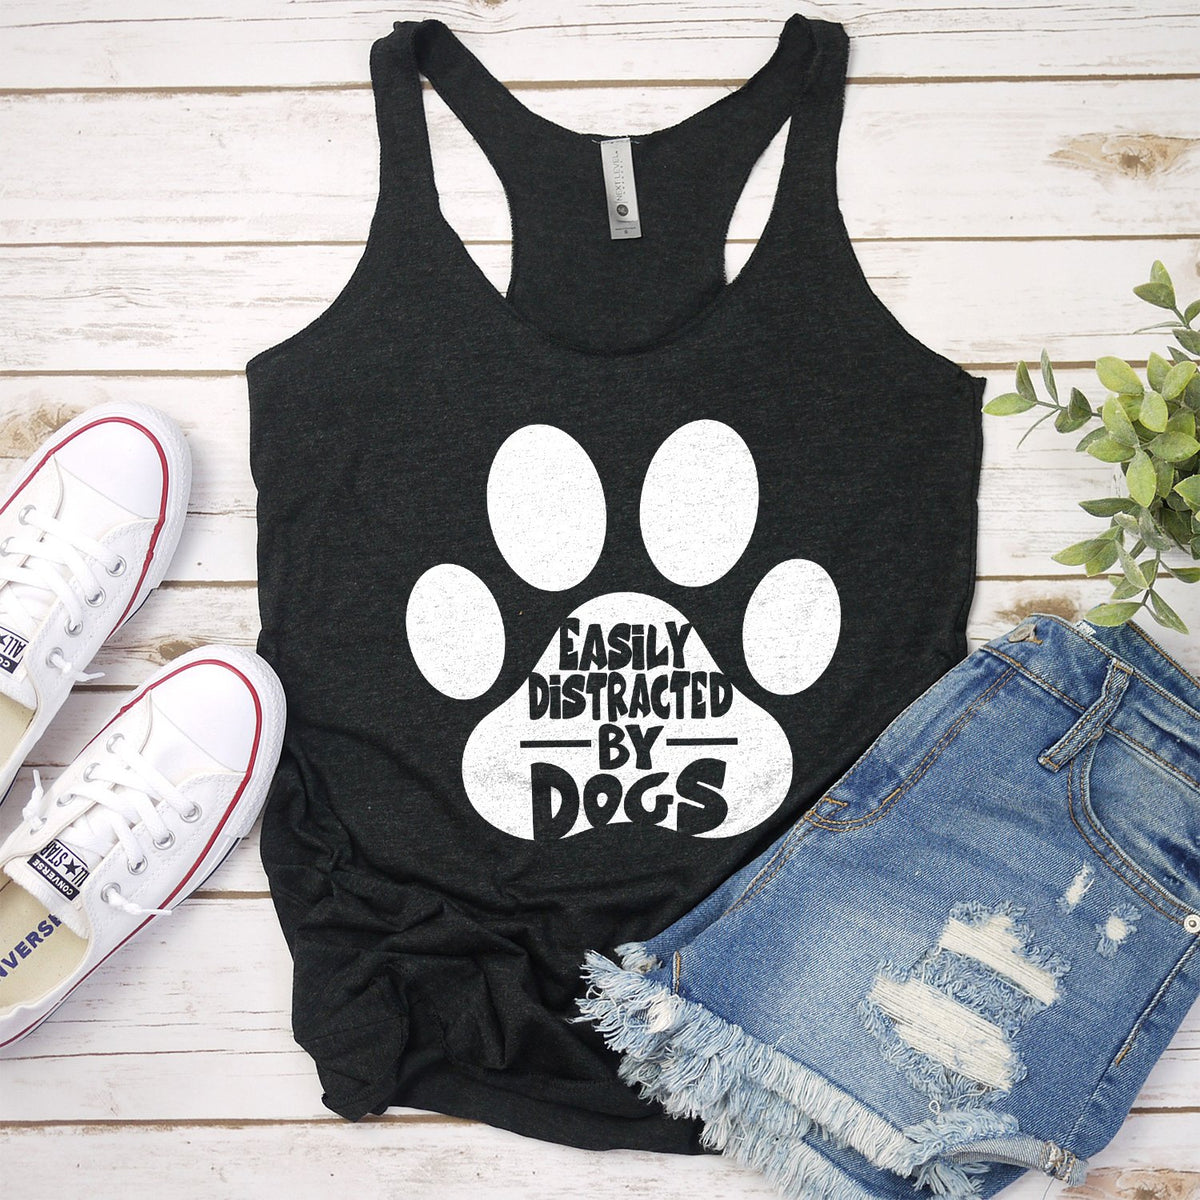 Easily Distracted By Dogs - Tank Top Racerback